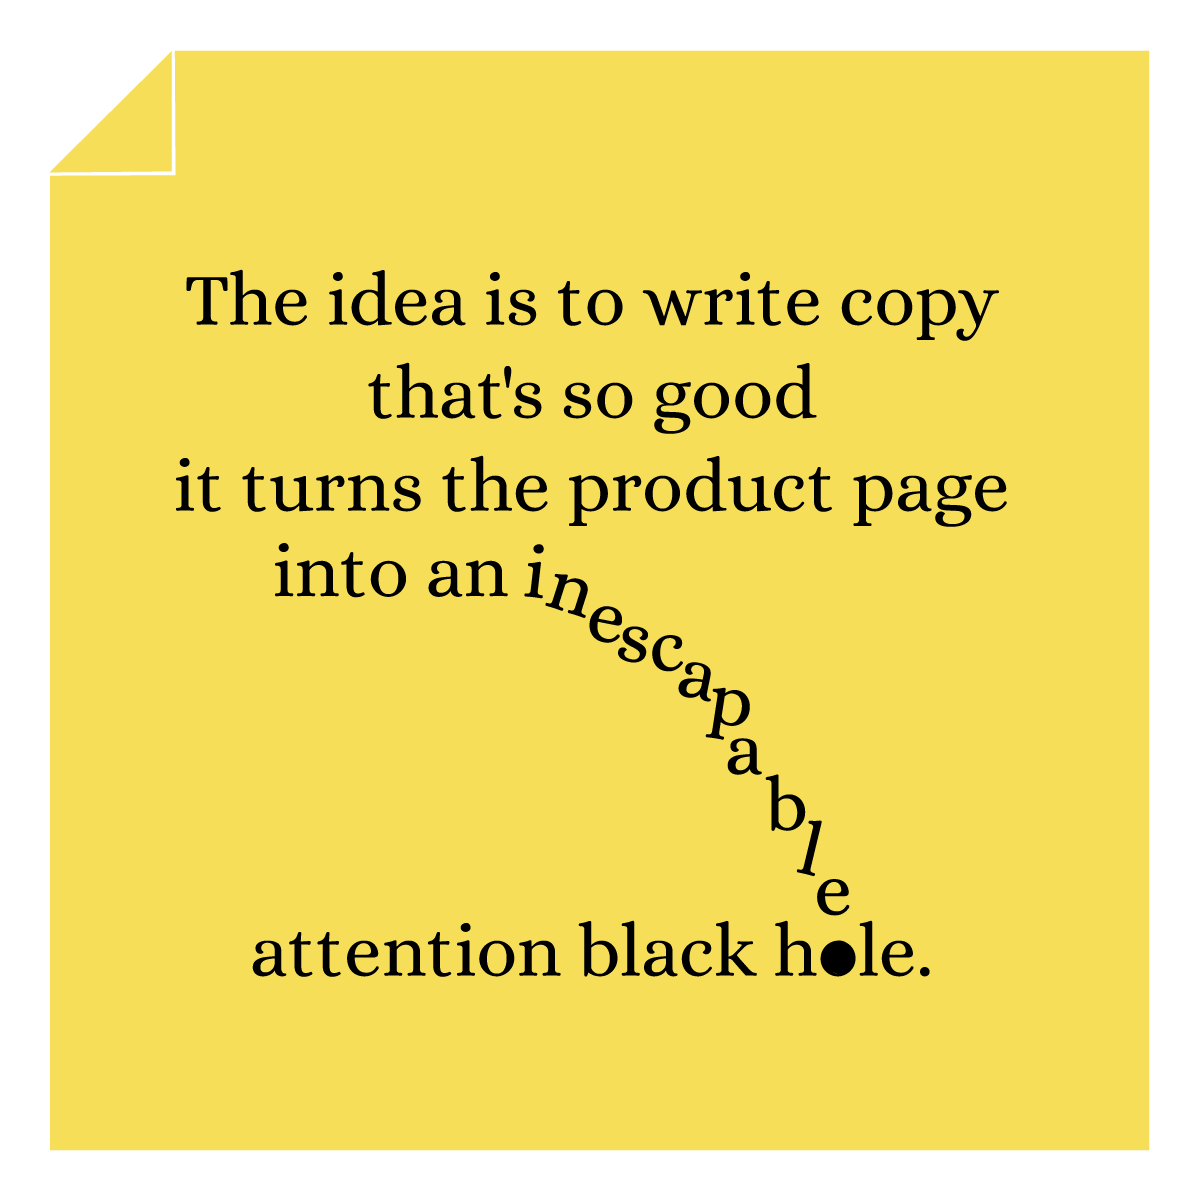 Convert your product page copy into an attention black hole.